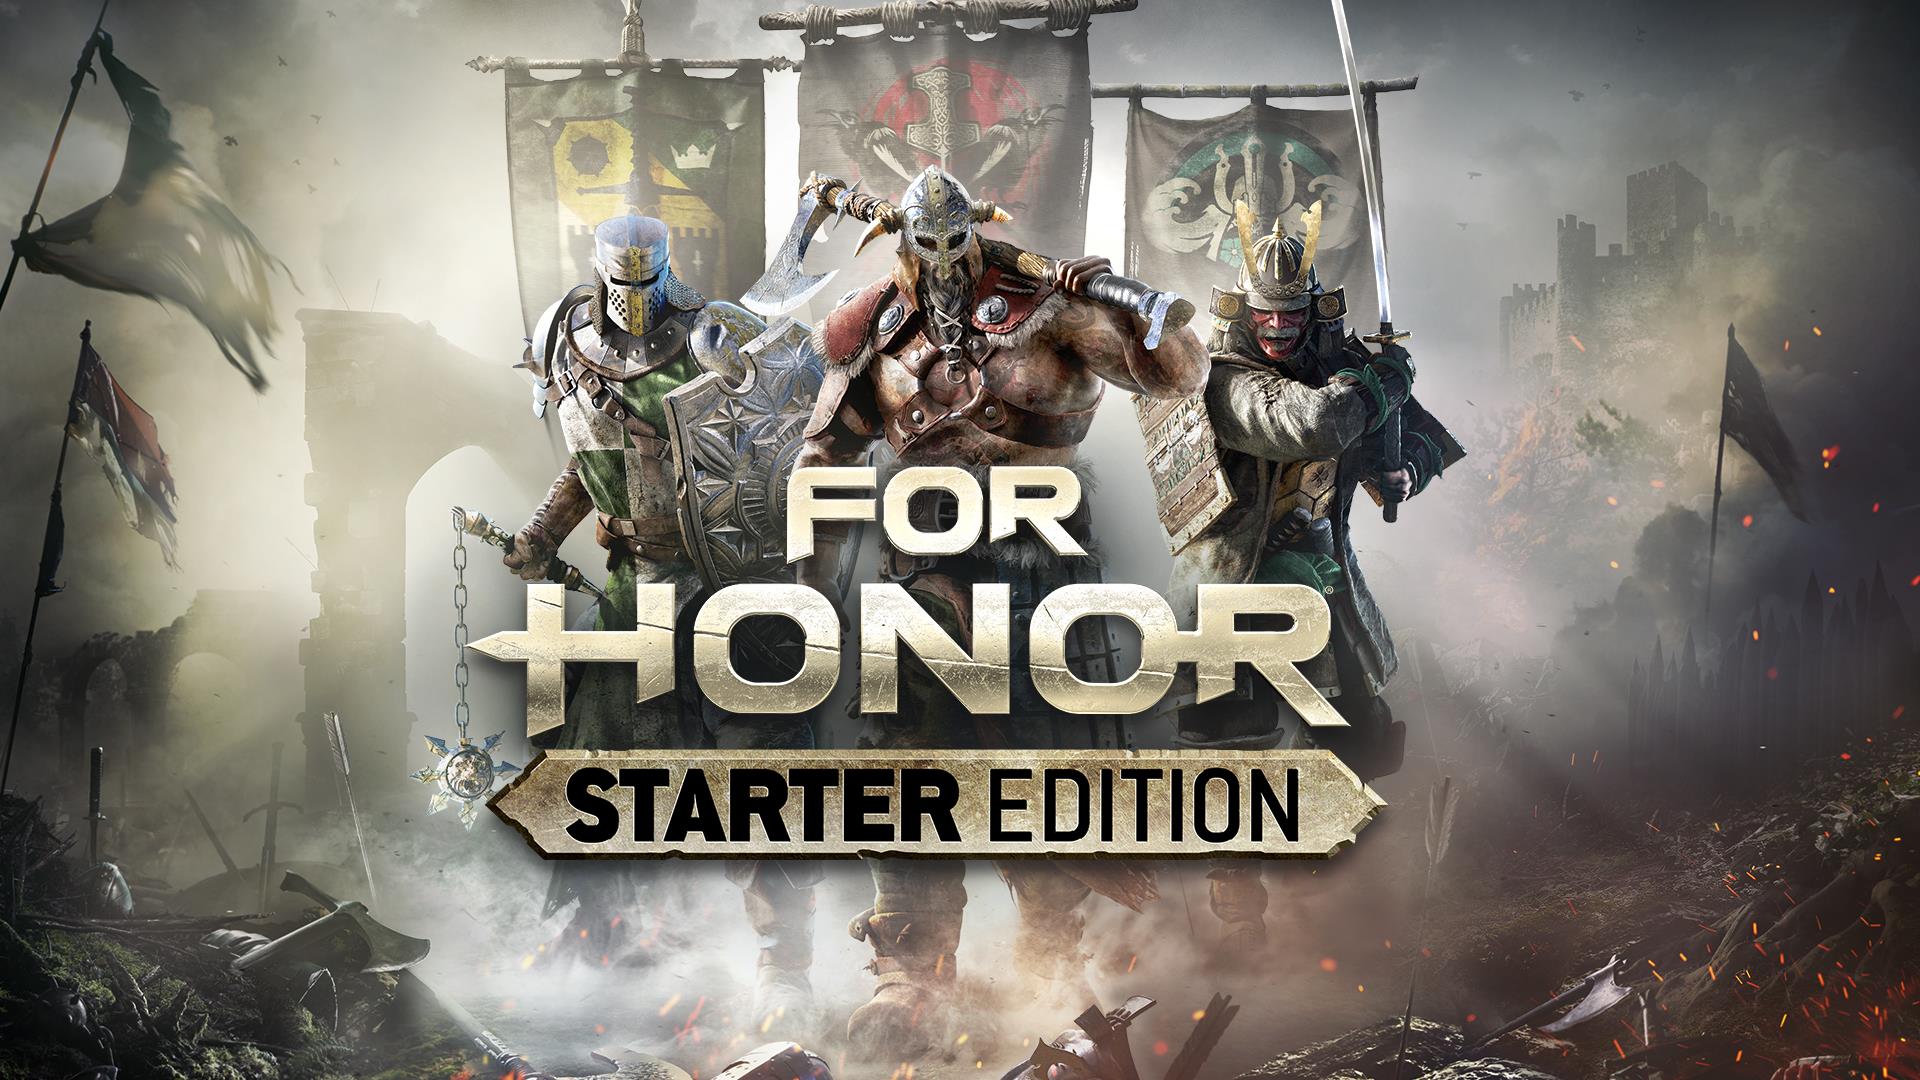 Image for For Honor Starter Edition includes 6 heroes, campaign and everything else for $15